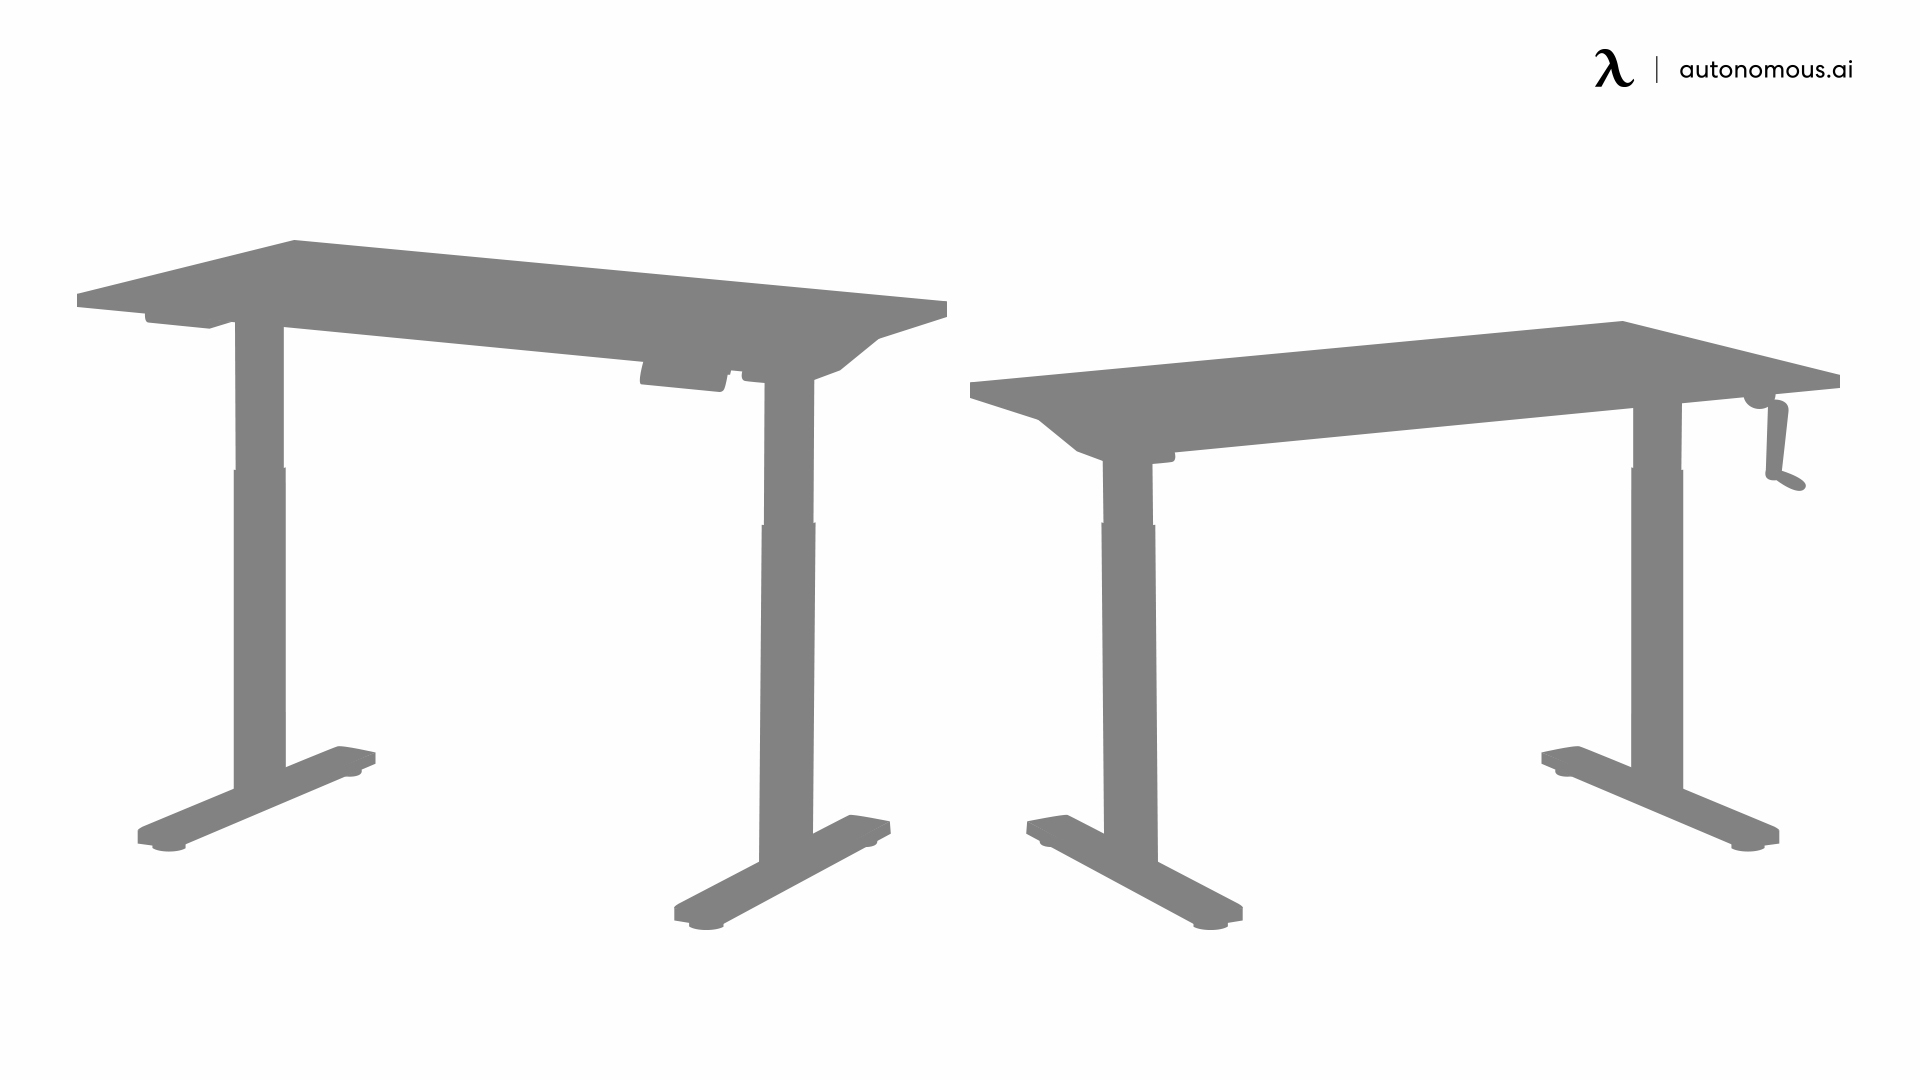 Typical executive desk dimensions